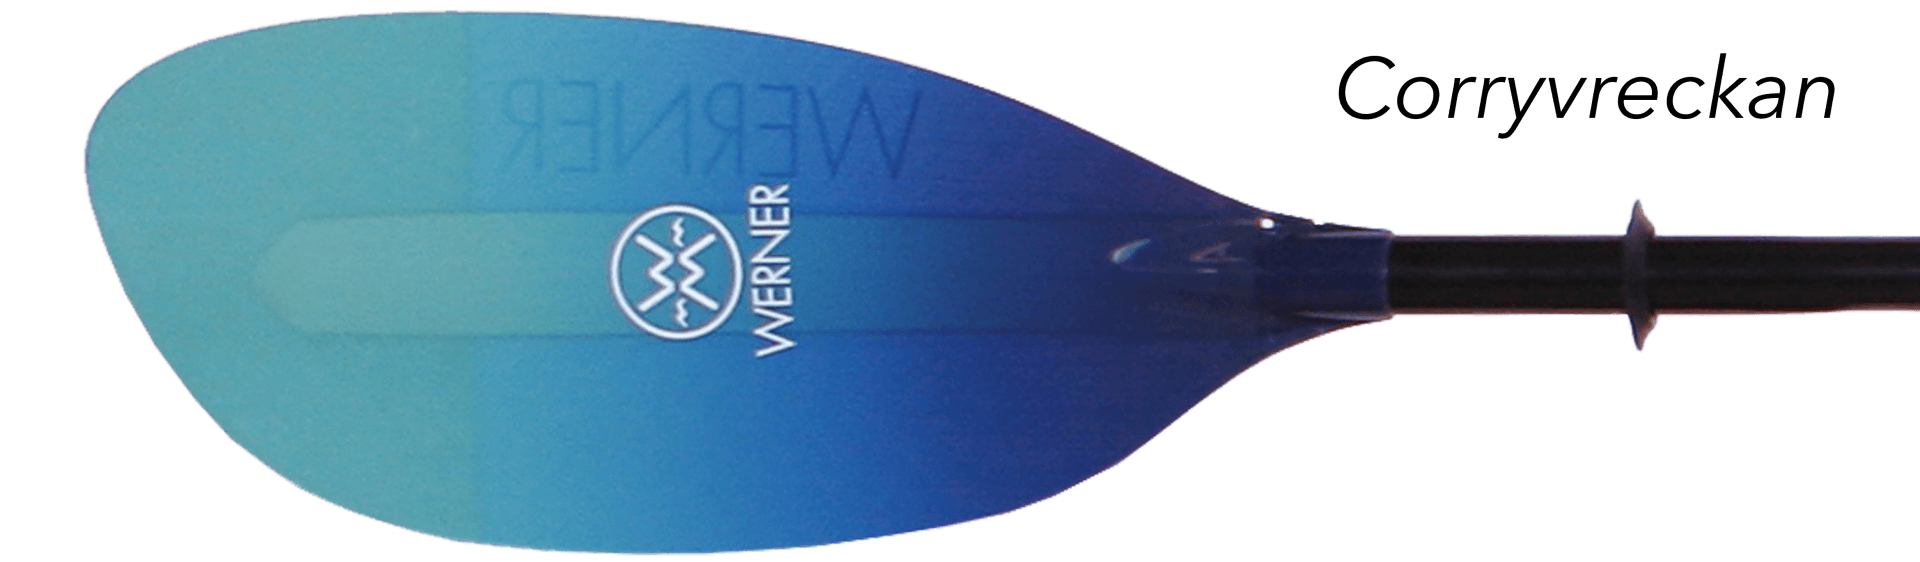 Werner corryvreckan abyss paddle